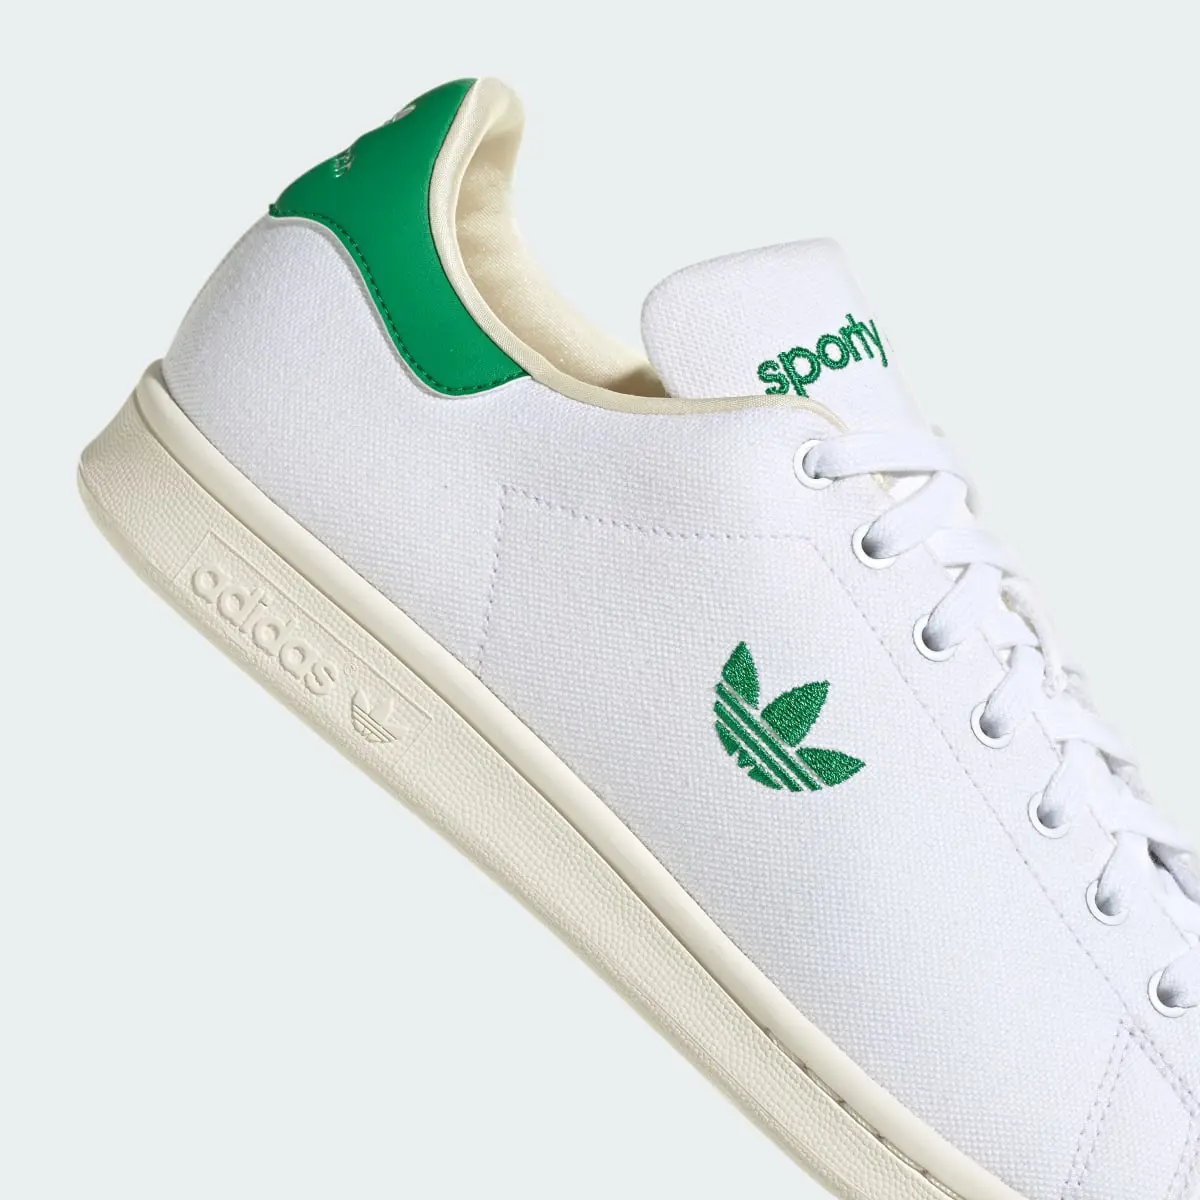 Adidas Stan Smith Sporty & Rich Shoes. 3